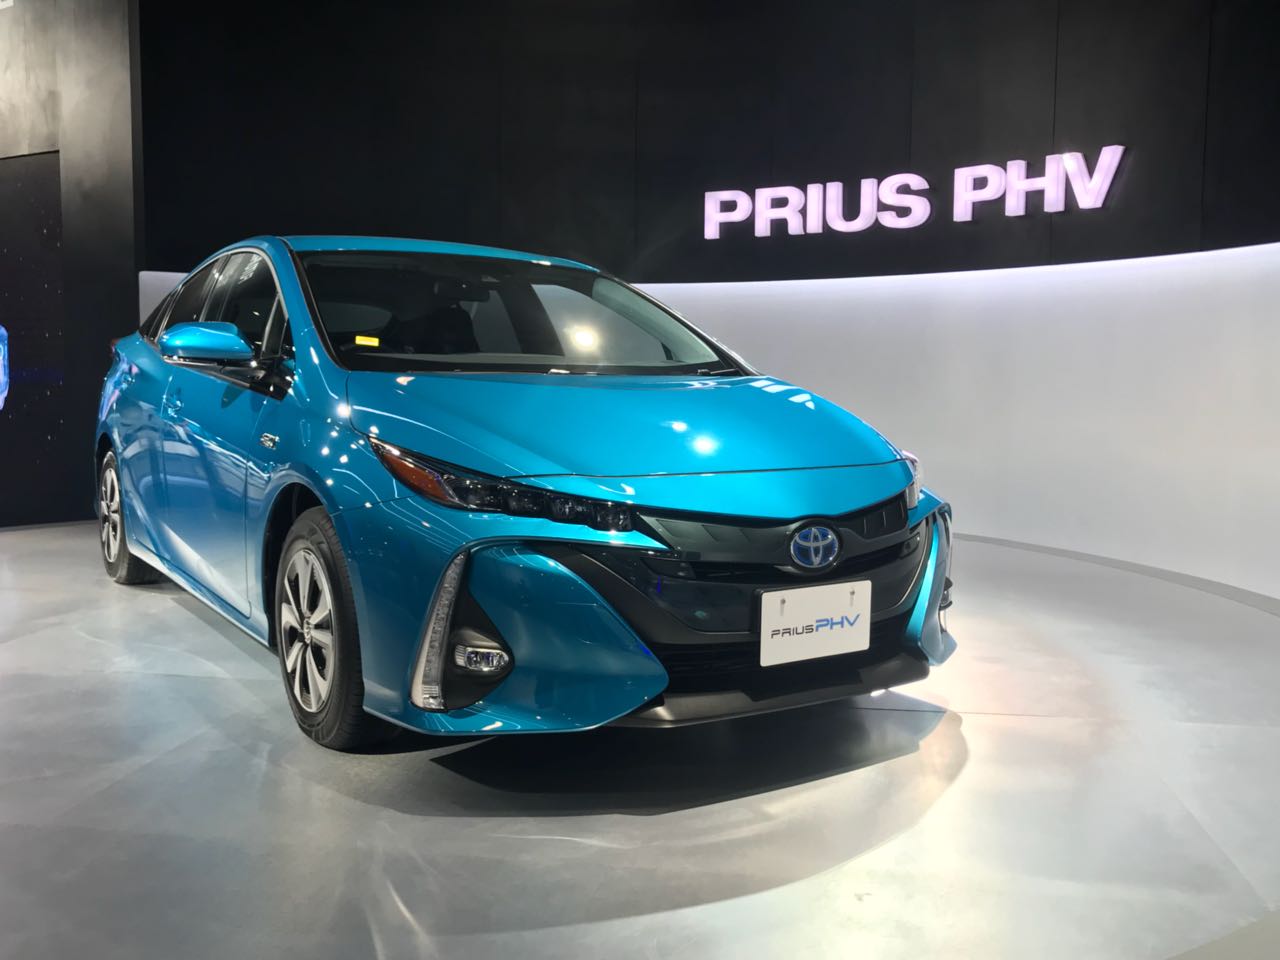 <p>The Toyota Prius PHV (Plug-in Hybrid Vehicle) at Hall no. 9, Stand no. N3</p>